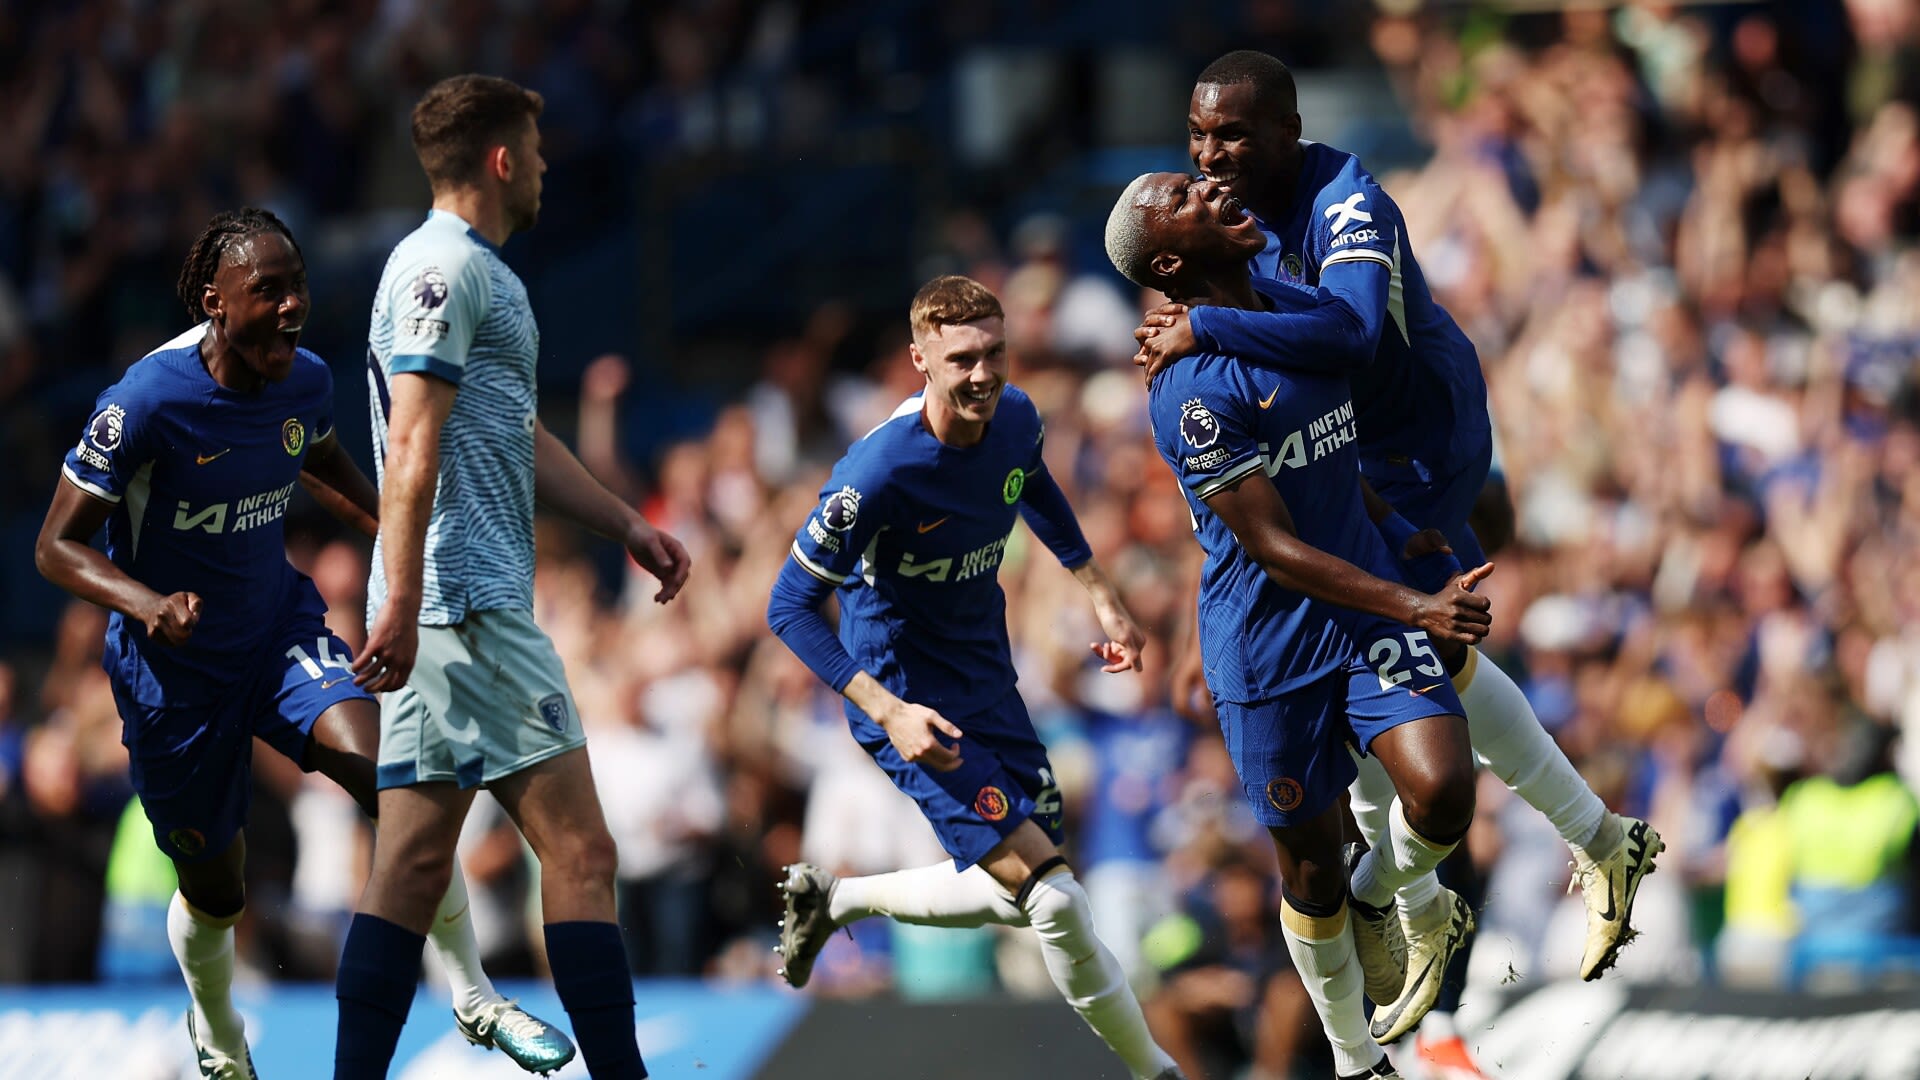 Chelsea 2-1 Bournemouth: Blues end Pochettino's first season with 5th straight win